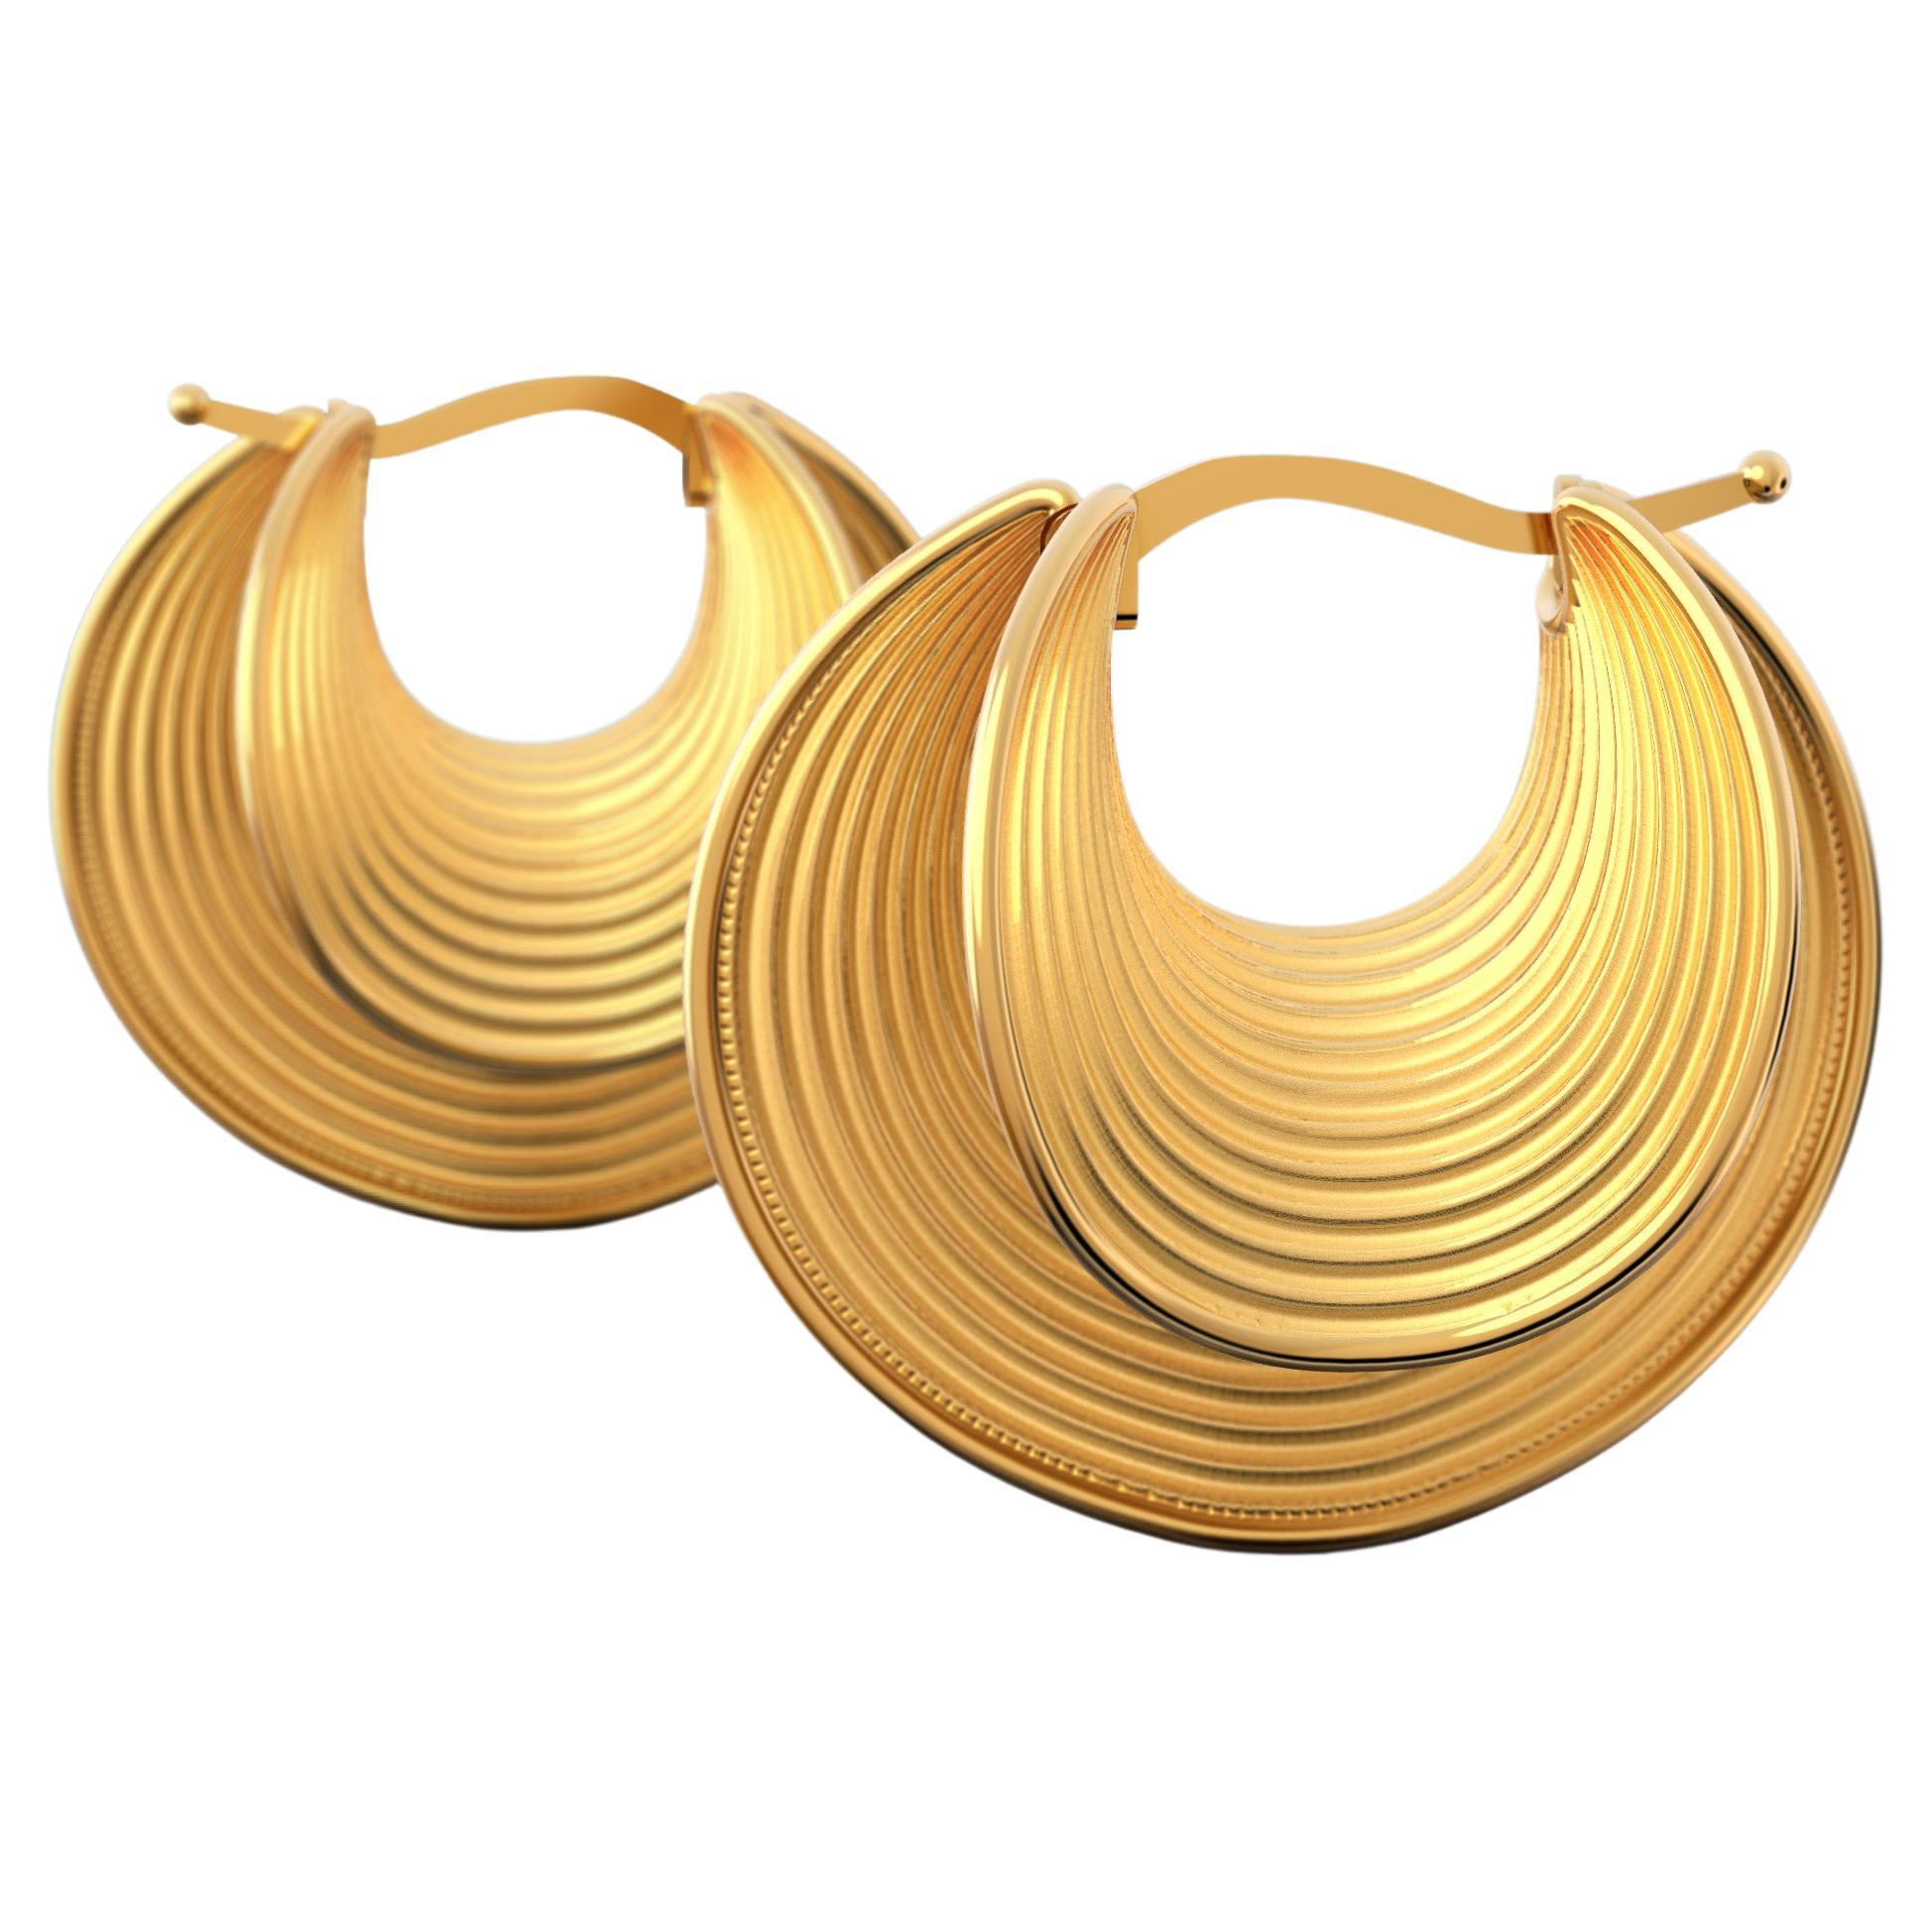 18k Gold Hoop Earrings, Oltremare Gioielli Gold Earrings Made in Italy